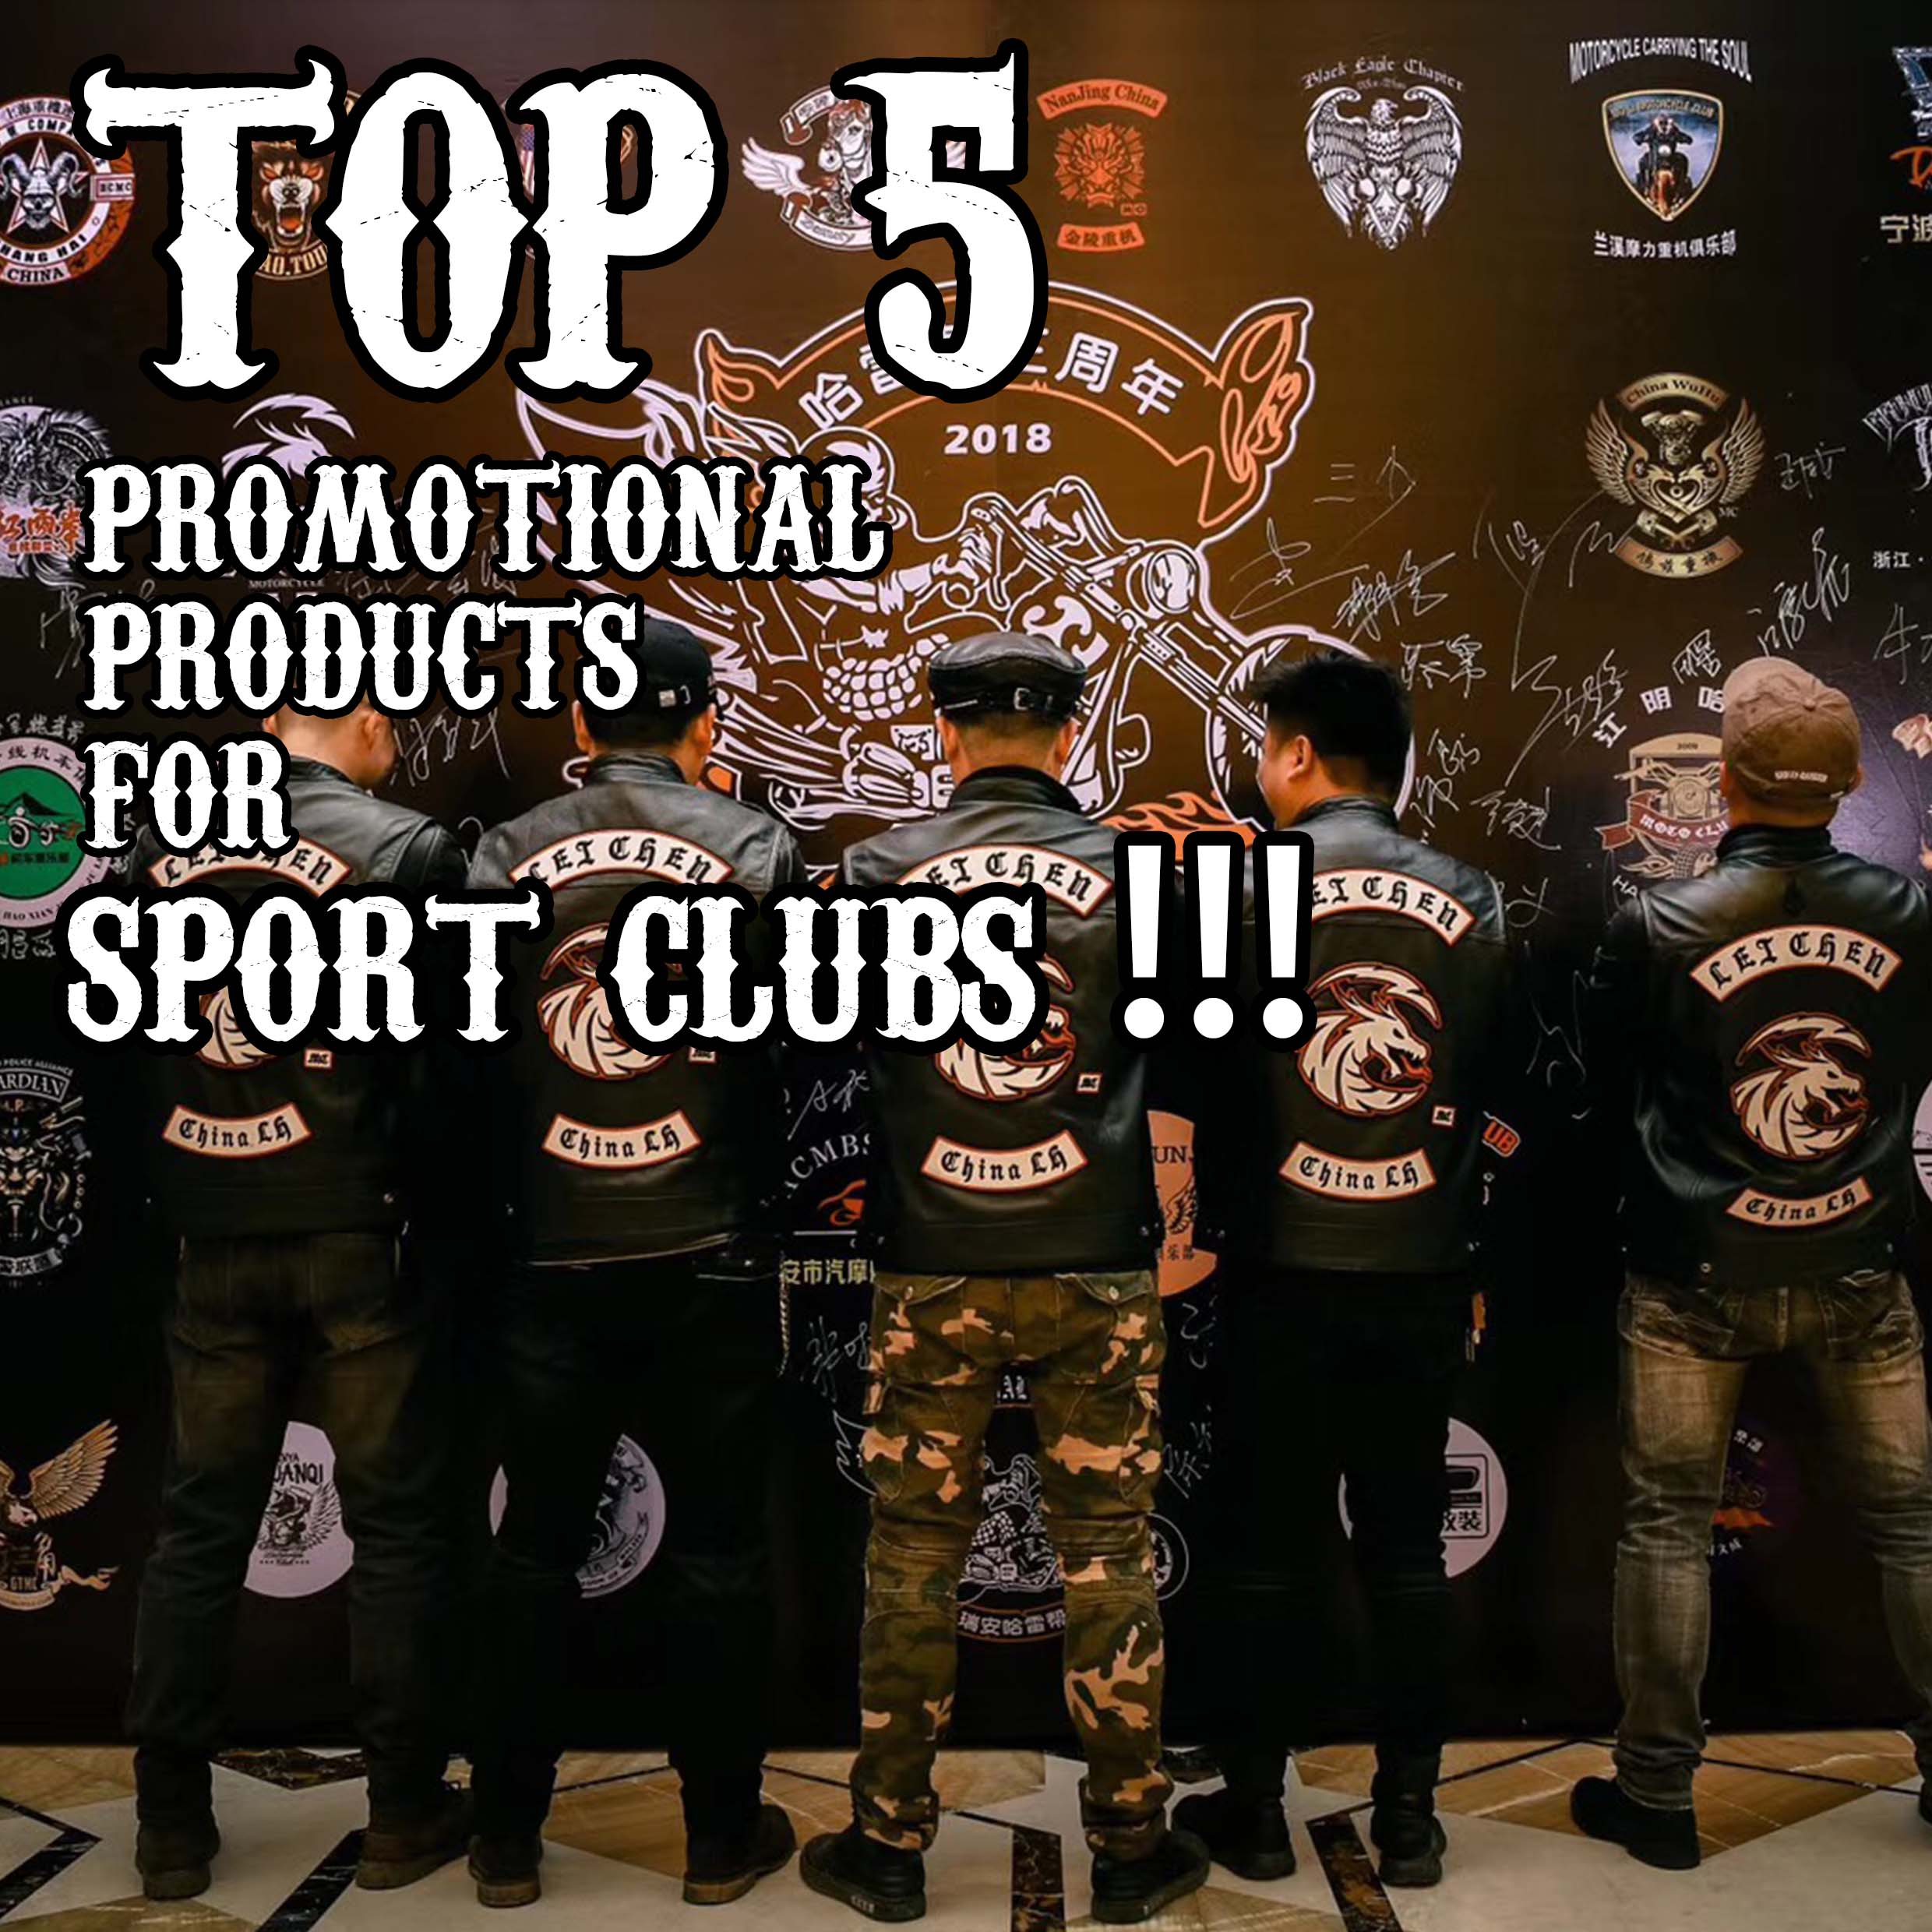 Top 5 Promotional Products for Sports Clubs